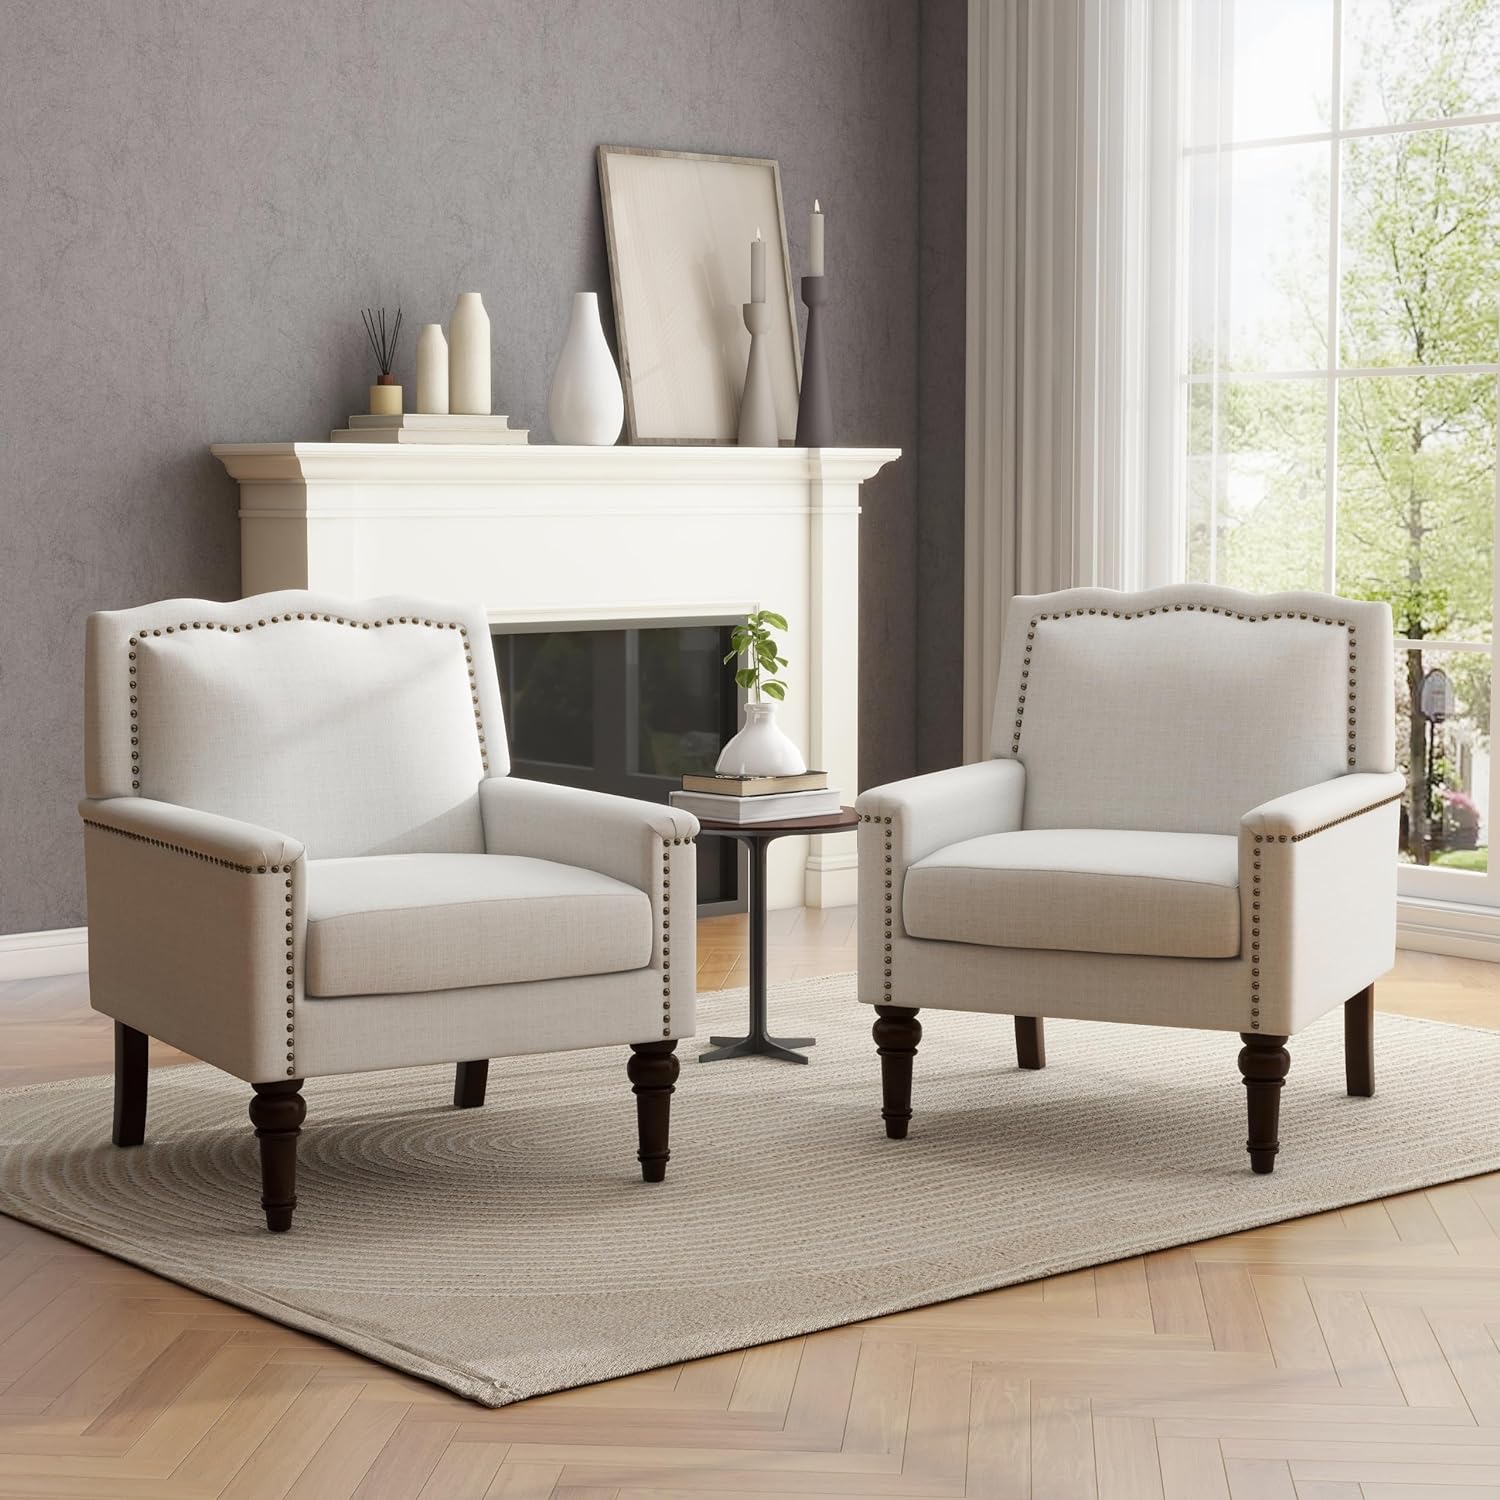 UIXE Accent Chairs Set of 2, Modern Living Room Arm Chair Nailhead Trim Upholstered Armchair with Wood Legs, Comfy Club Single Sofa Reading Seat Wingback Bedroom Side Sitting, Beige